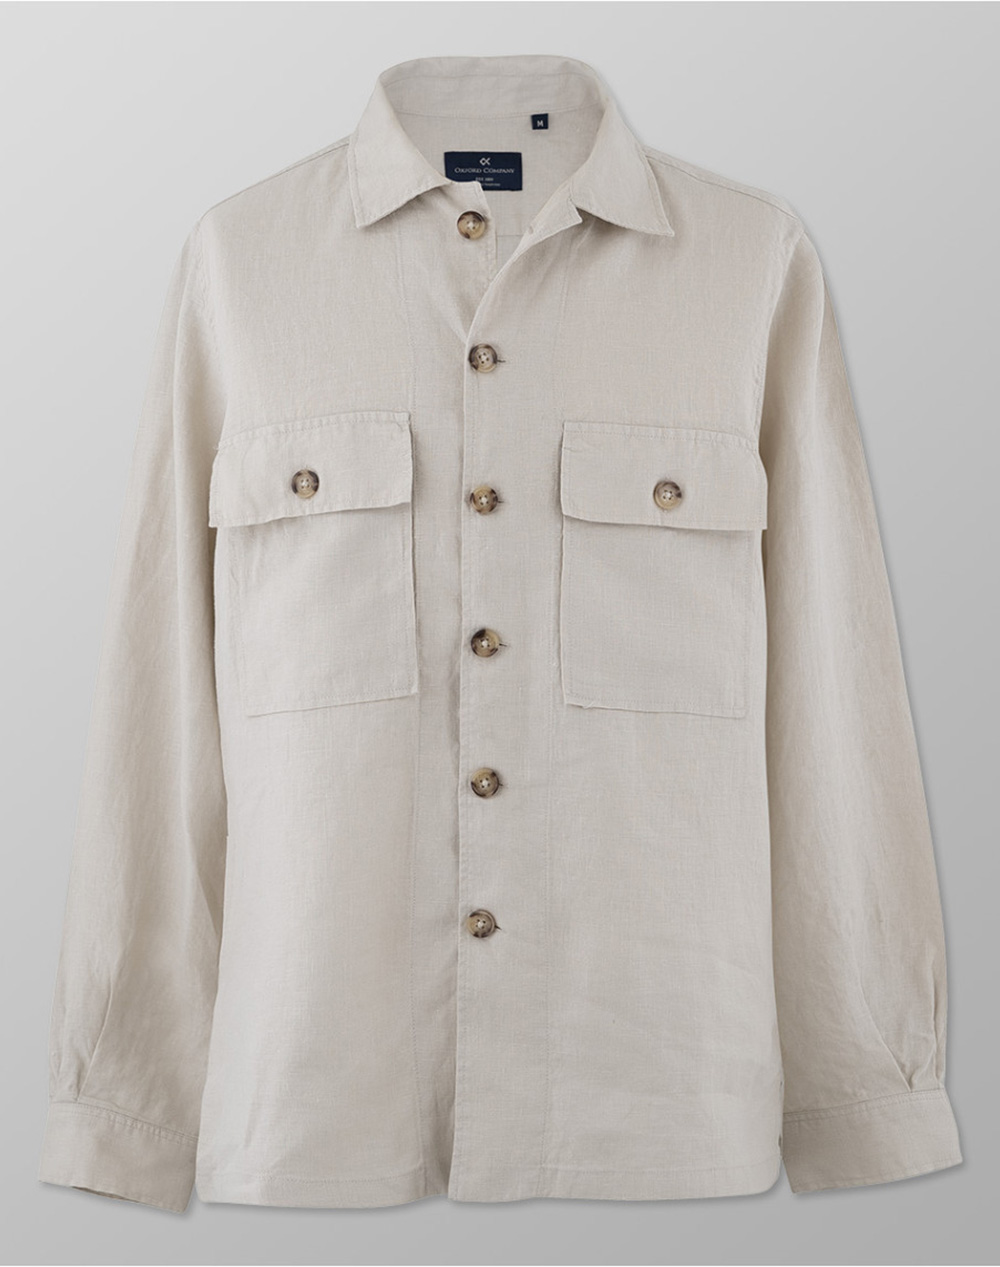 OXFORD COMPANY OVERSHIRT BUTTONS